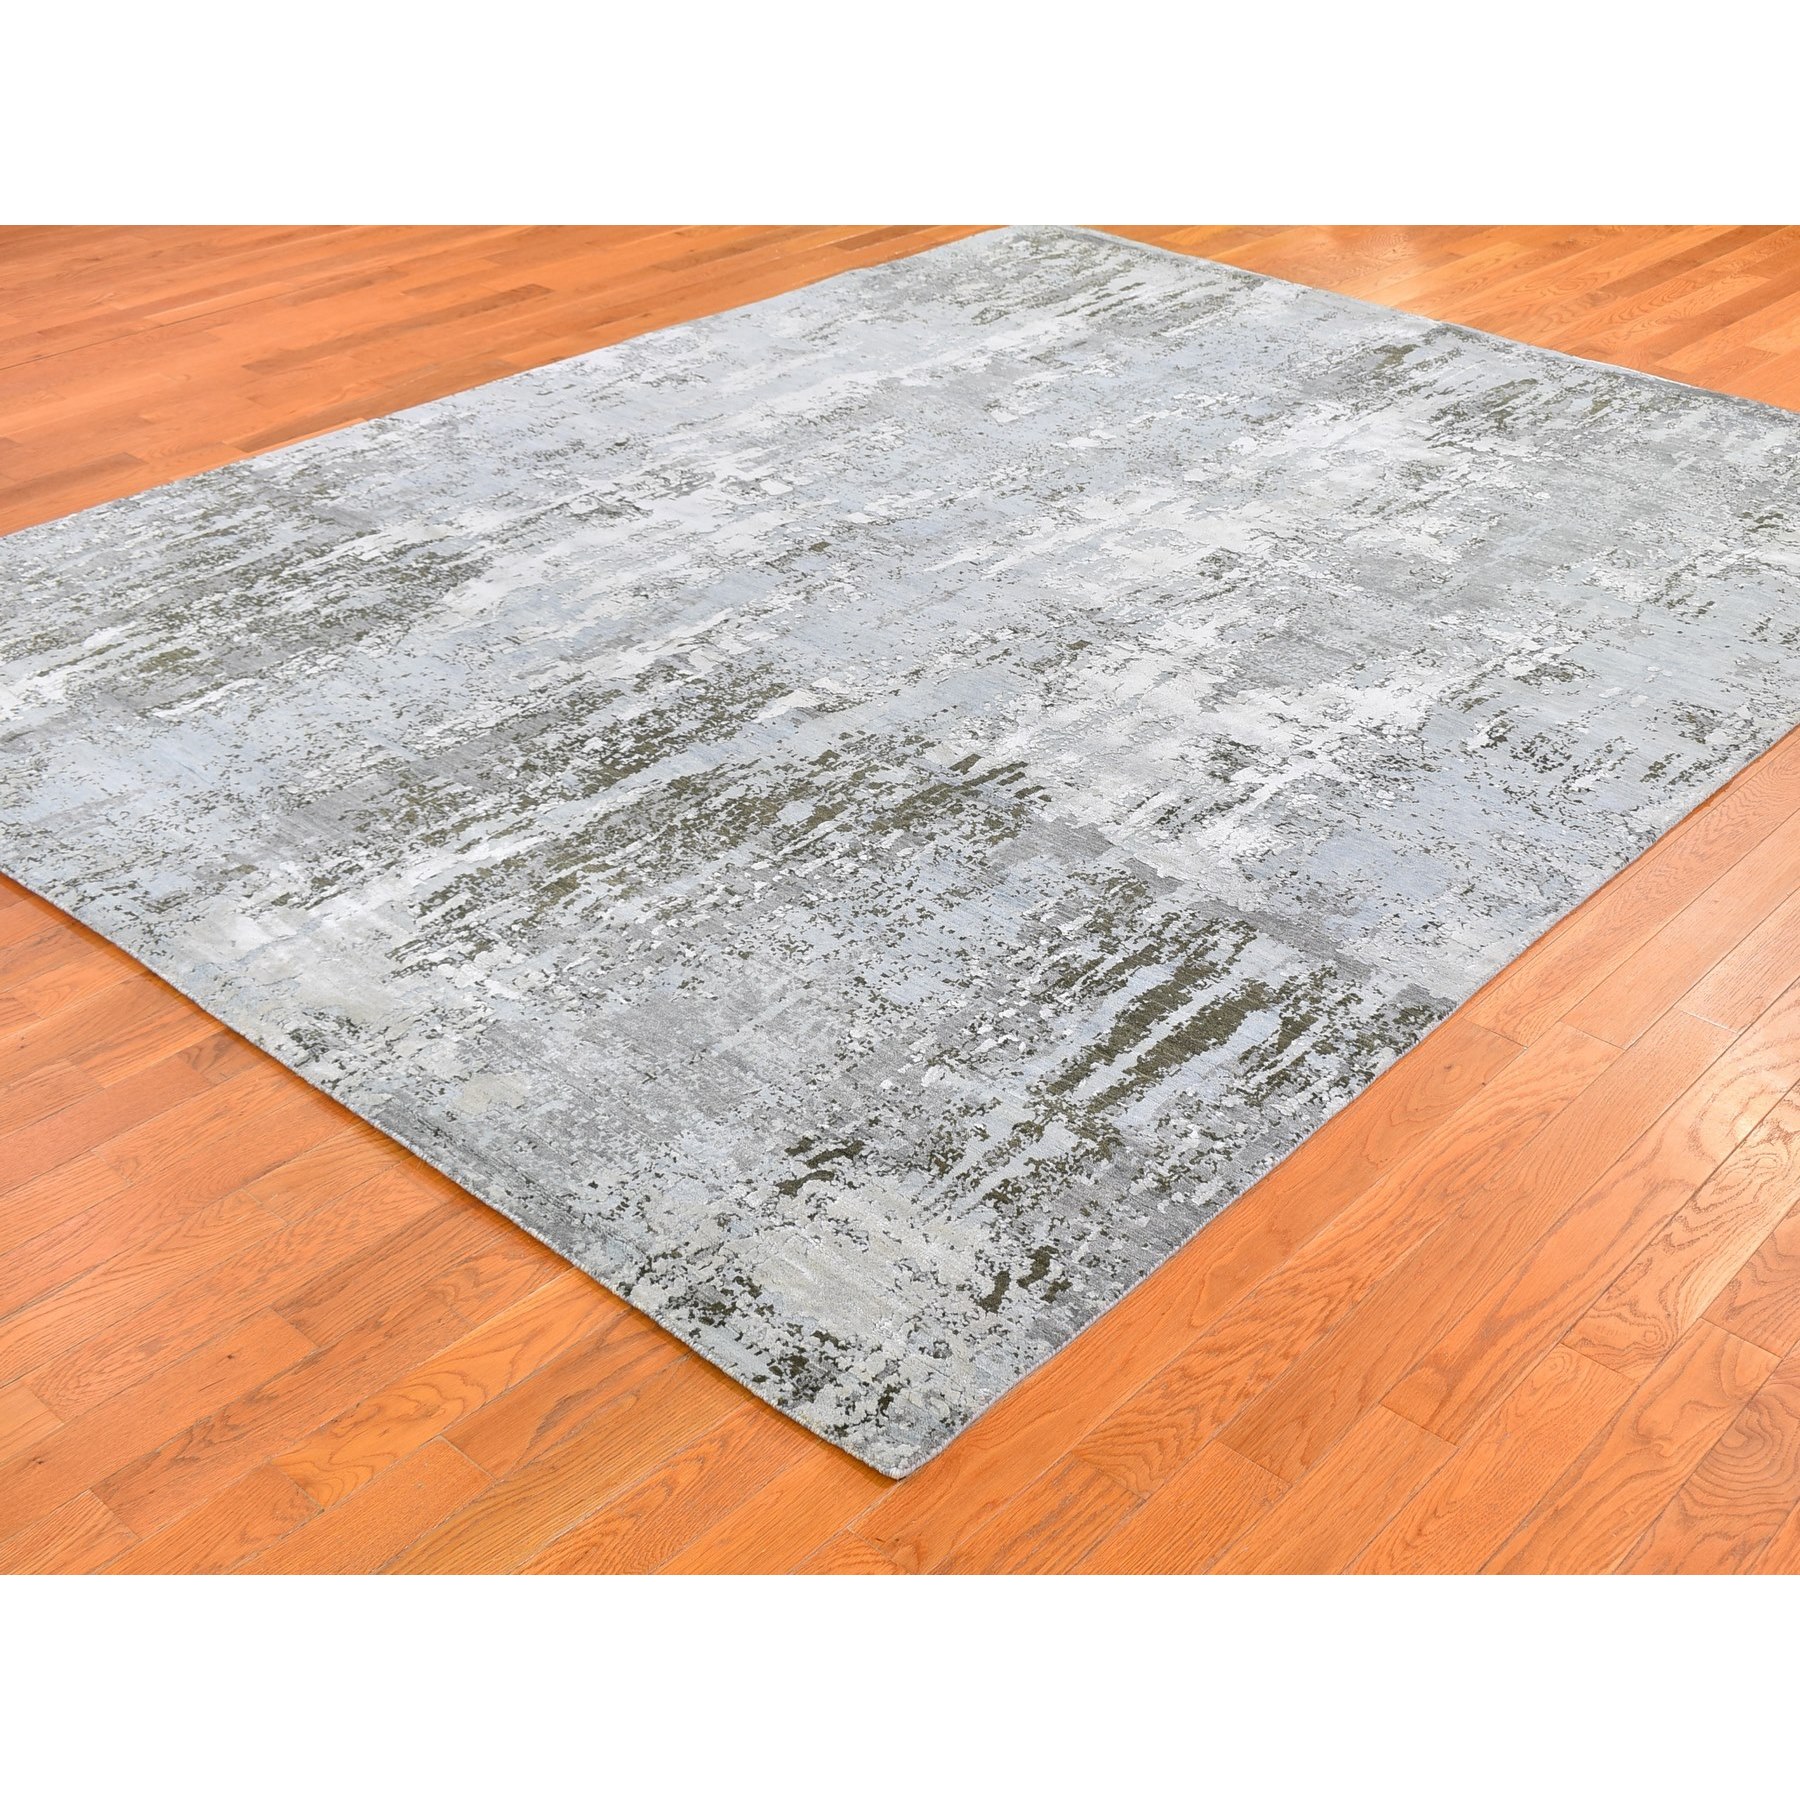 8'x10'2" Ivory Wool with Real Silk Abstract Design Denser Weave Hi-Low Pile Hand Woven Oriental Rug 